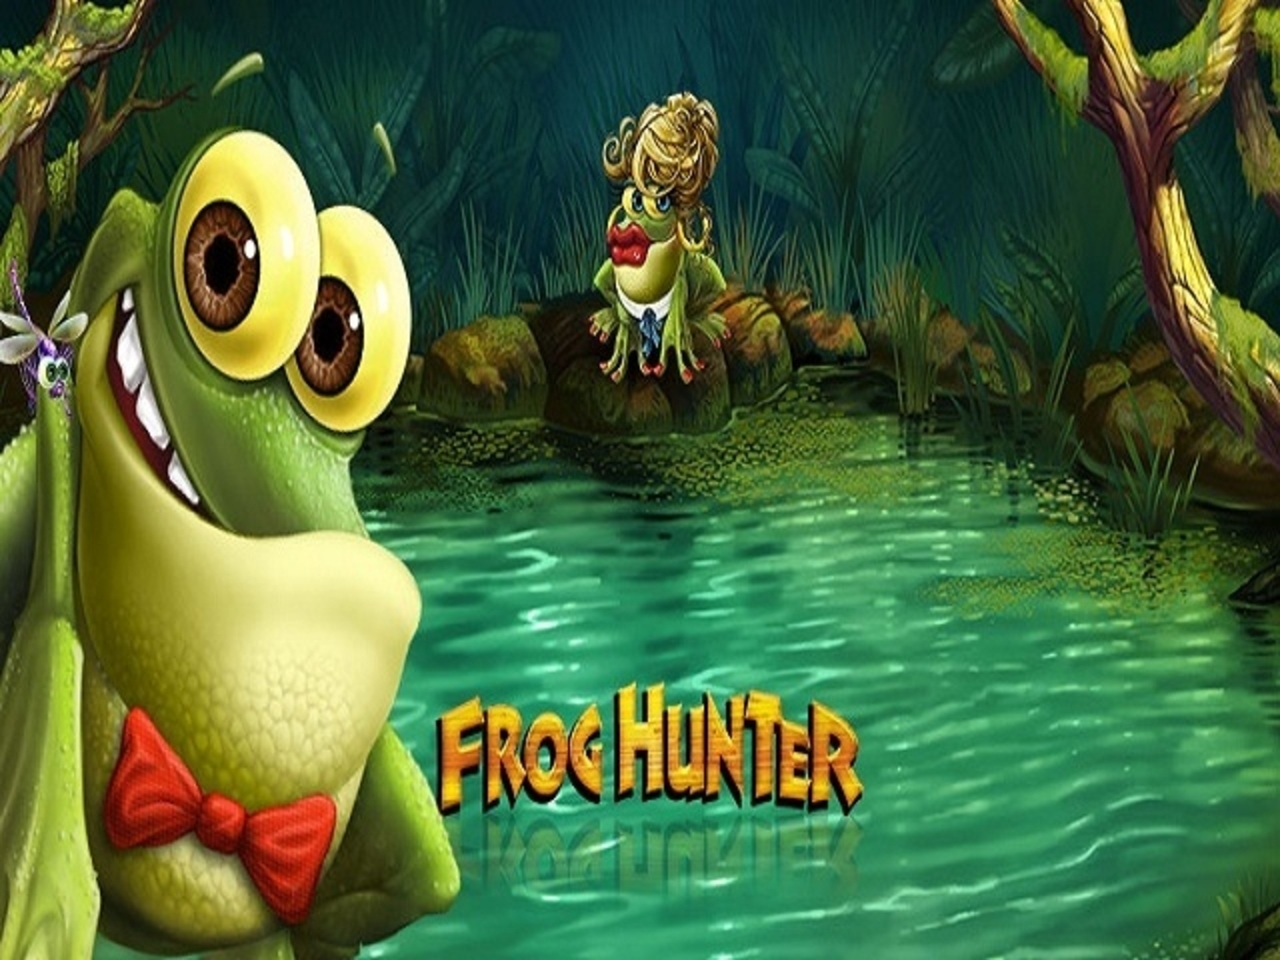 The Frog Hunter Online Slot Demo Game by Betsoft